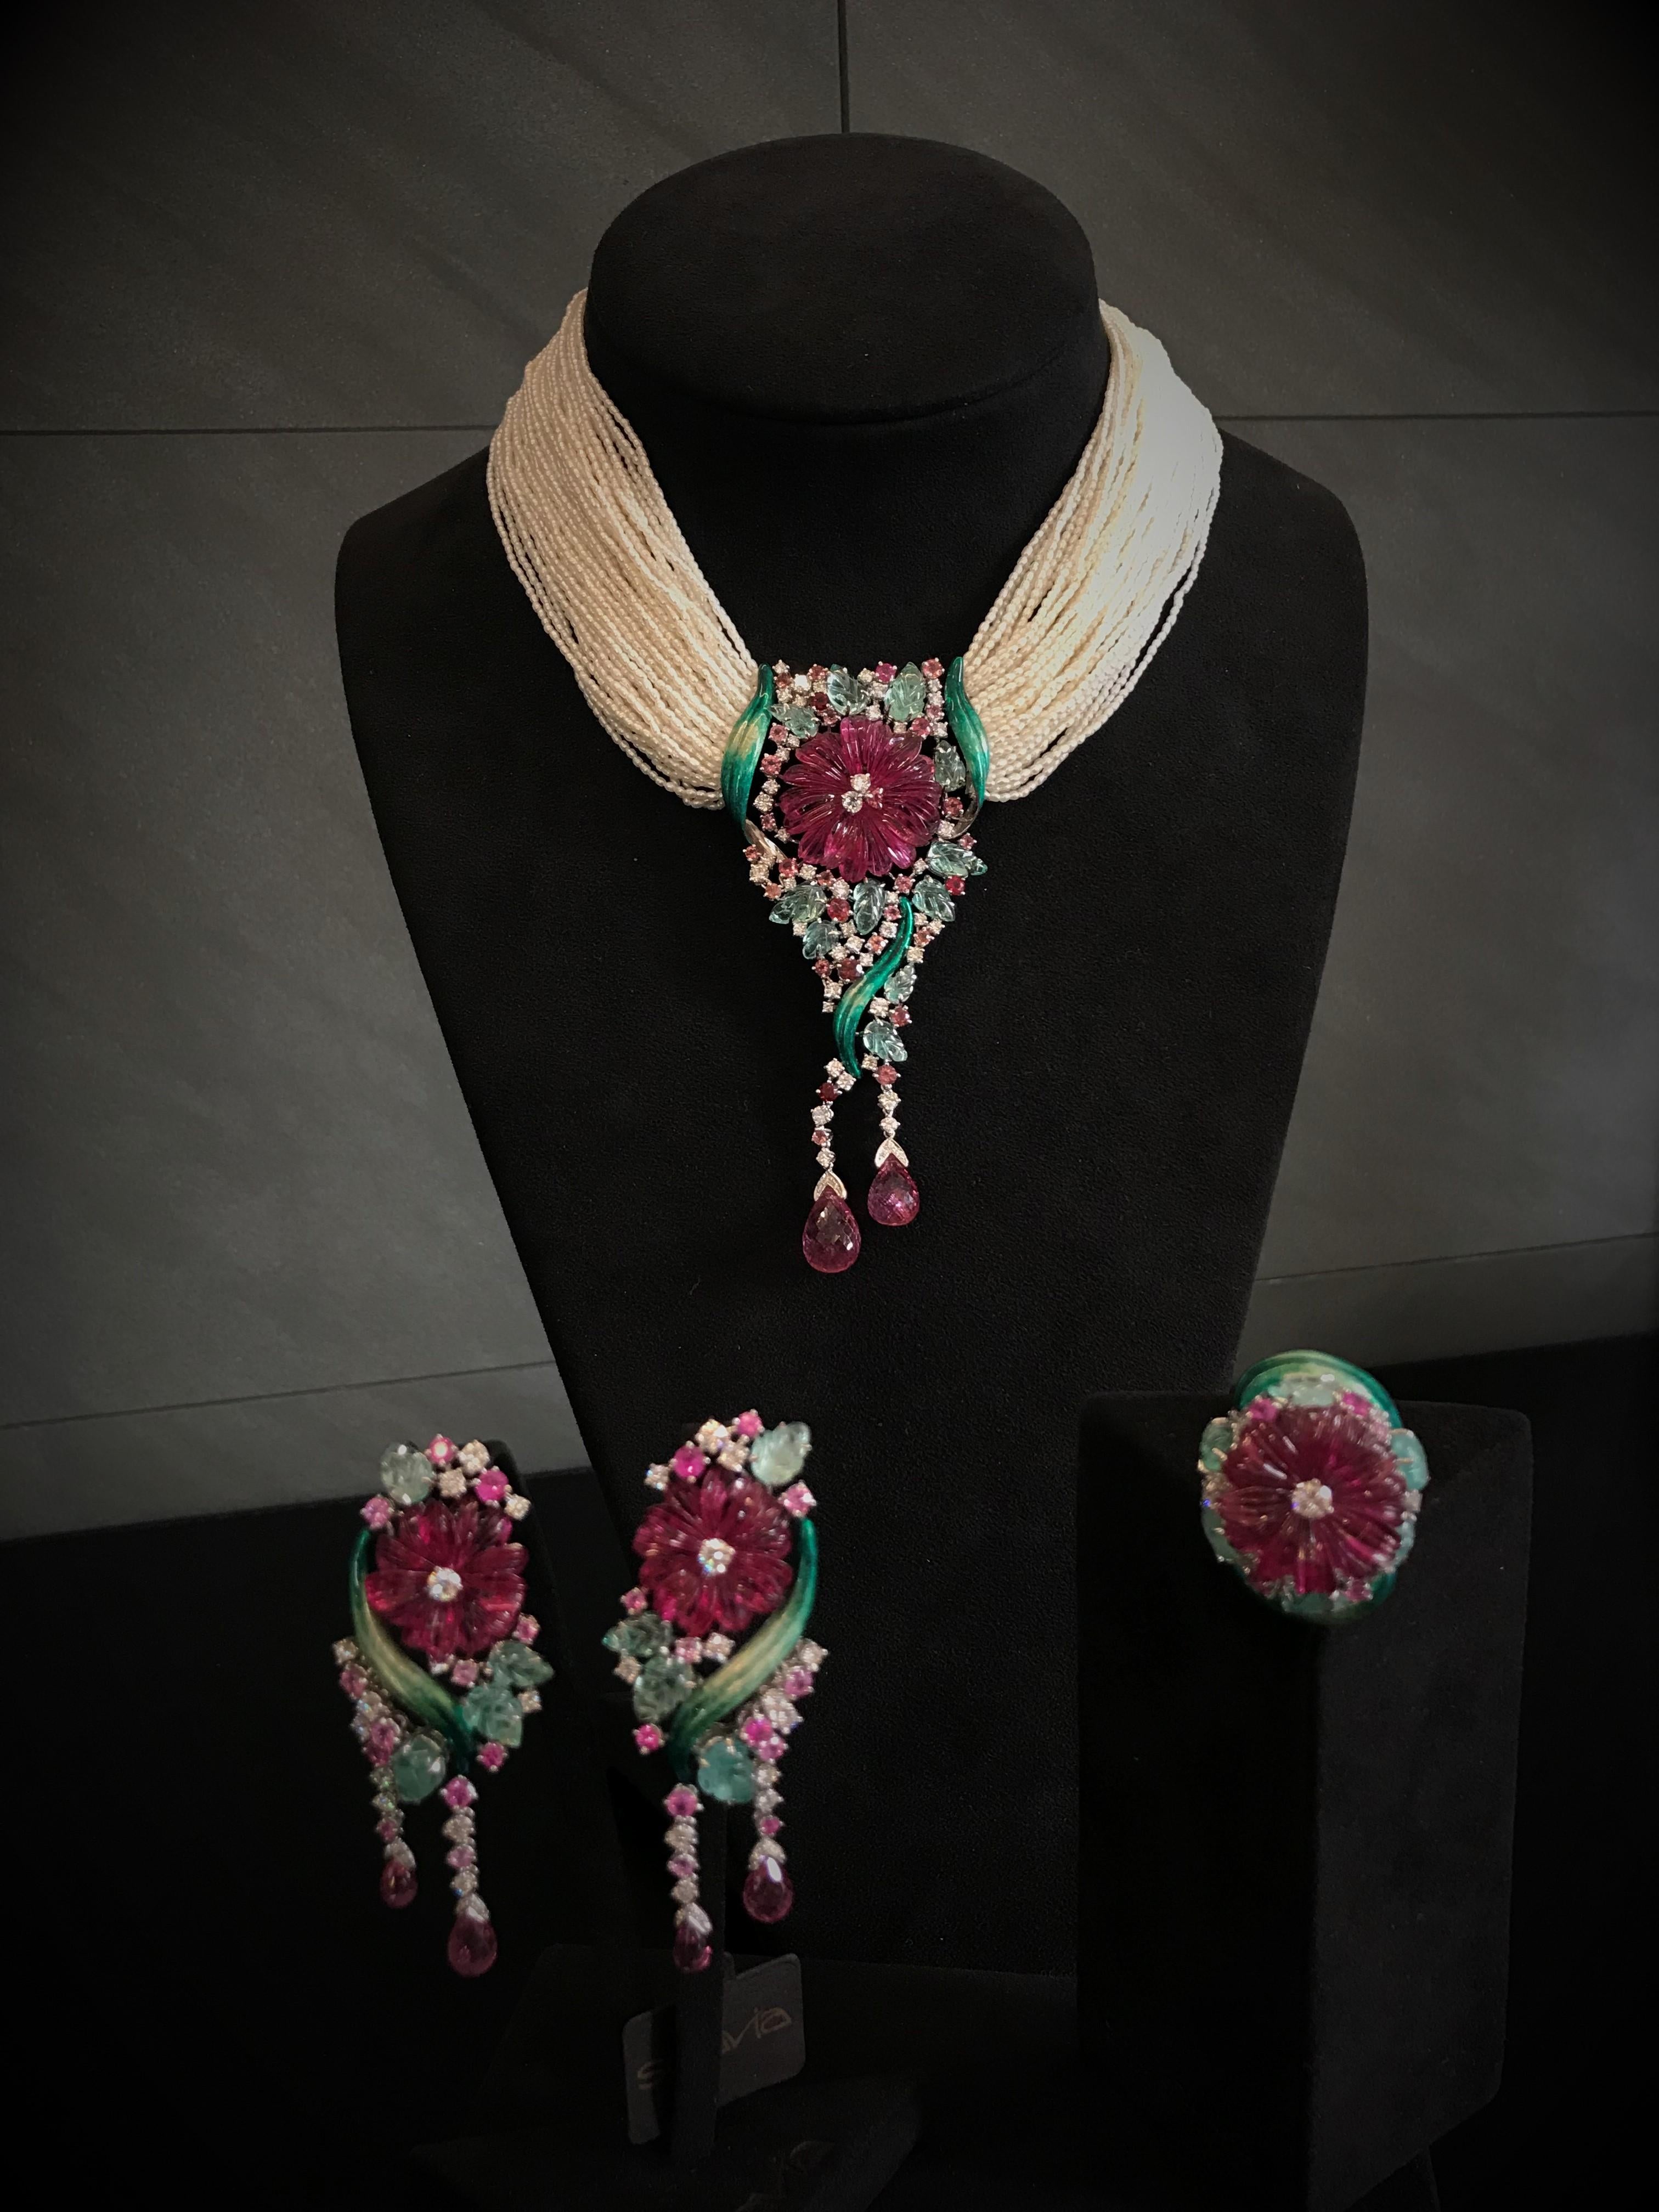 Almost a methaphysical flower for this necklace realized in white gold, pink rubelite flowers, briolette cut rubelites, emeralds leaves, round brilliant cut diamonds and pink tourmalines, green enamel and small pearls threads.
Diamonds total ct